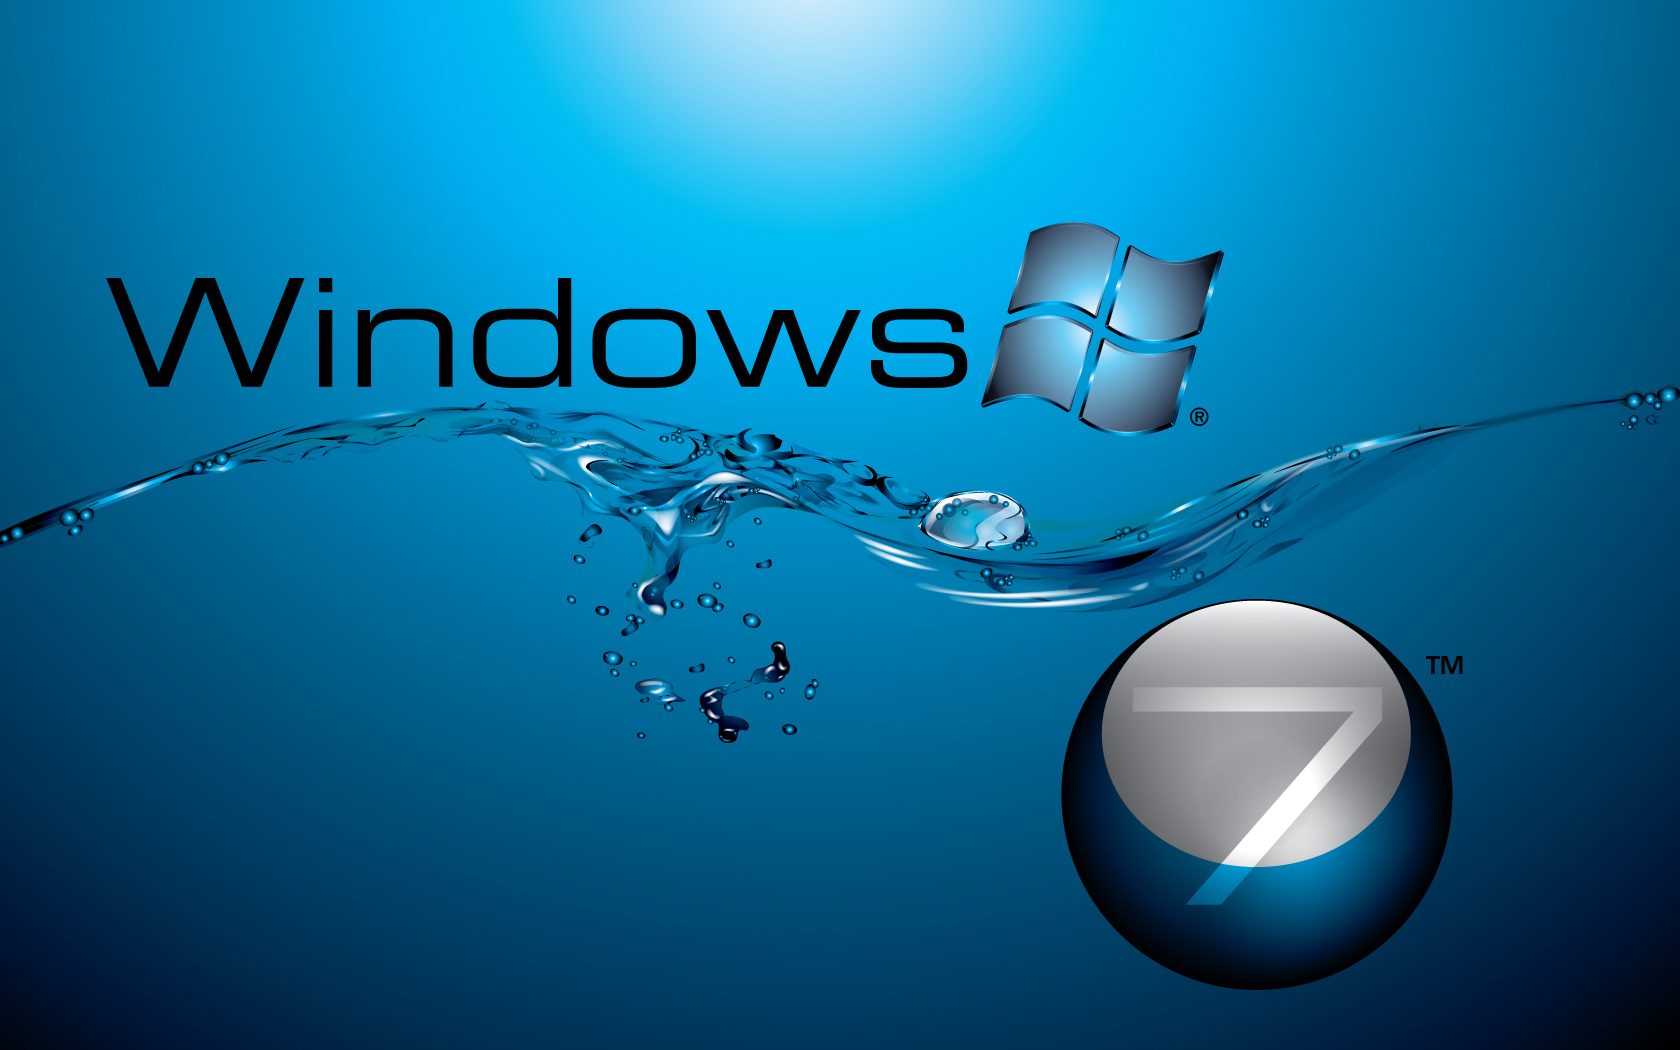  Download Hd Wallpapers For Laptop Windows